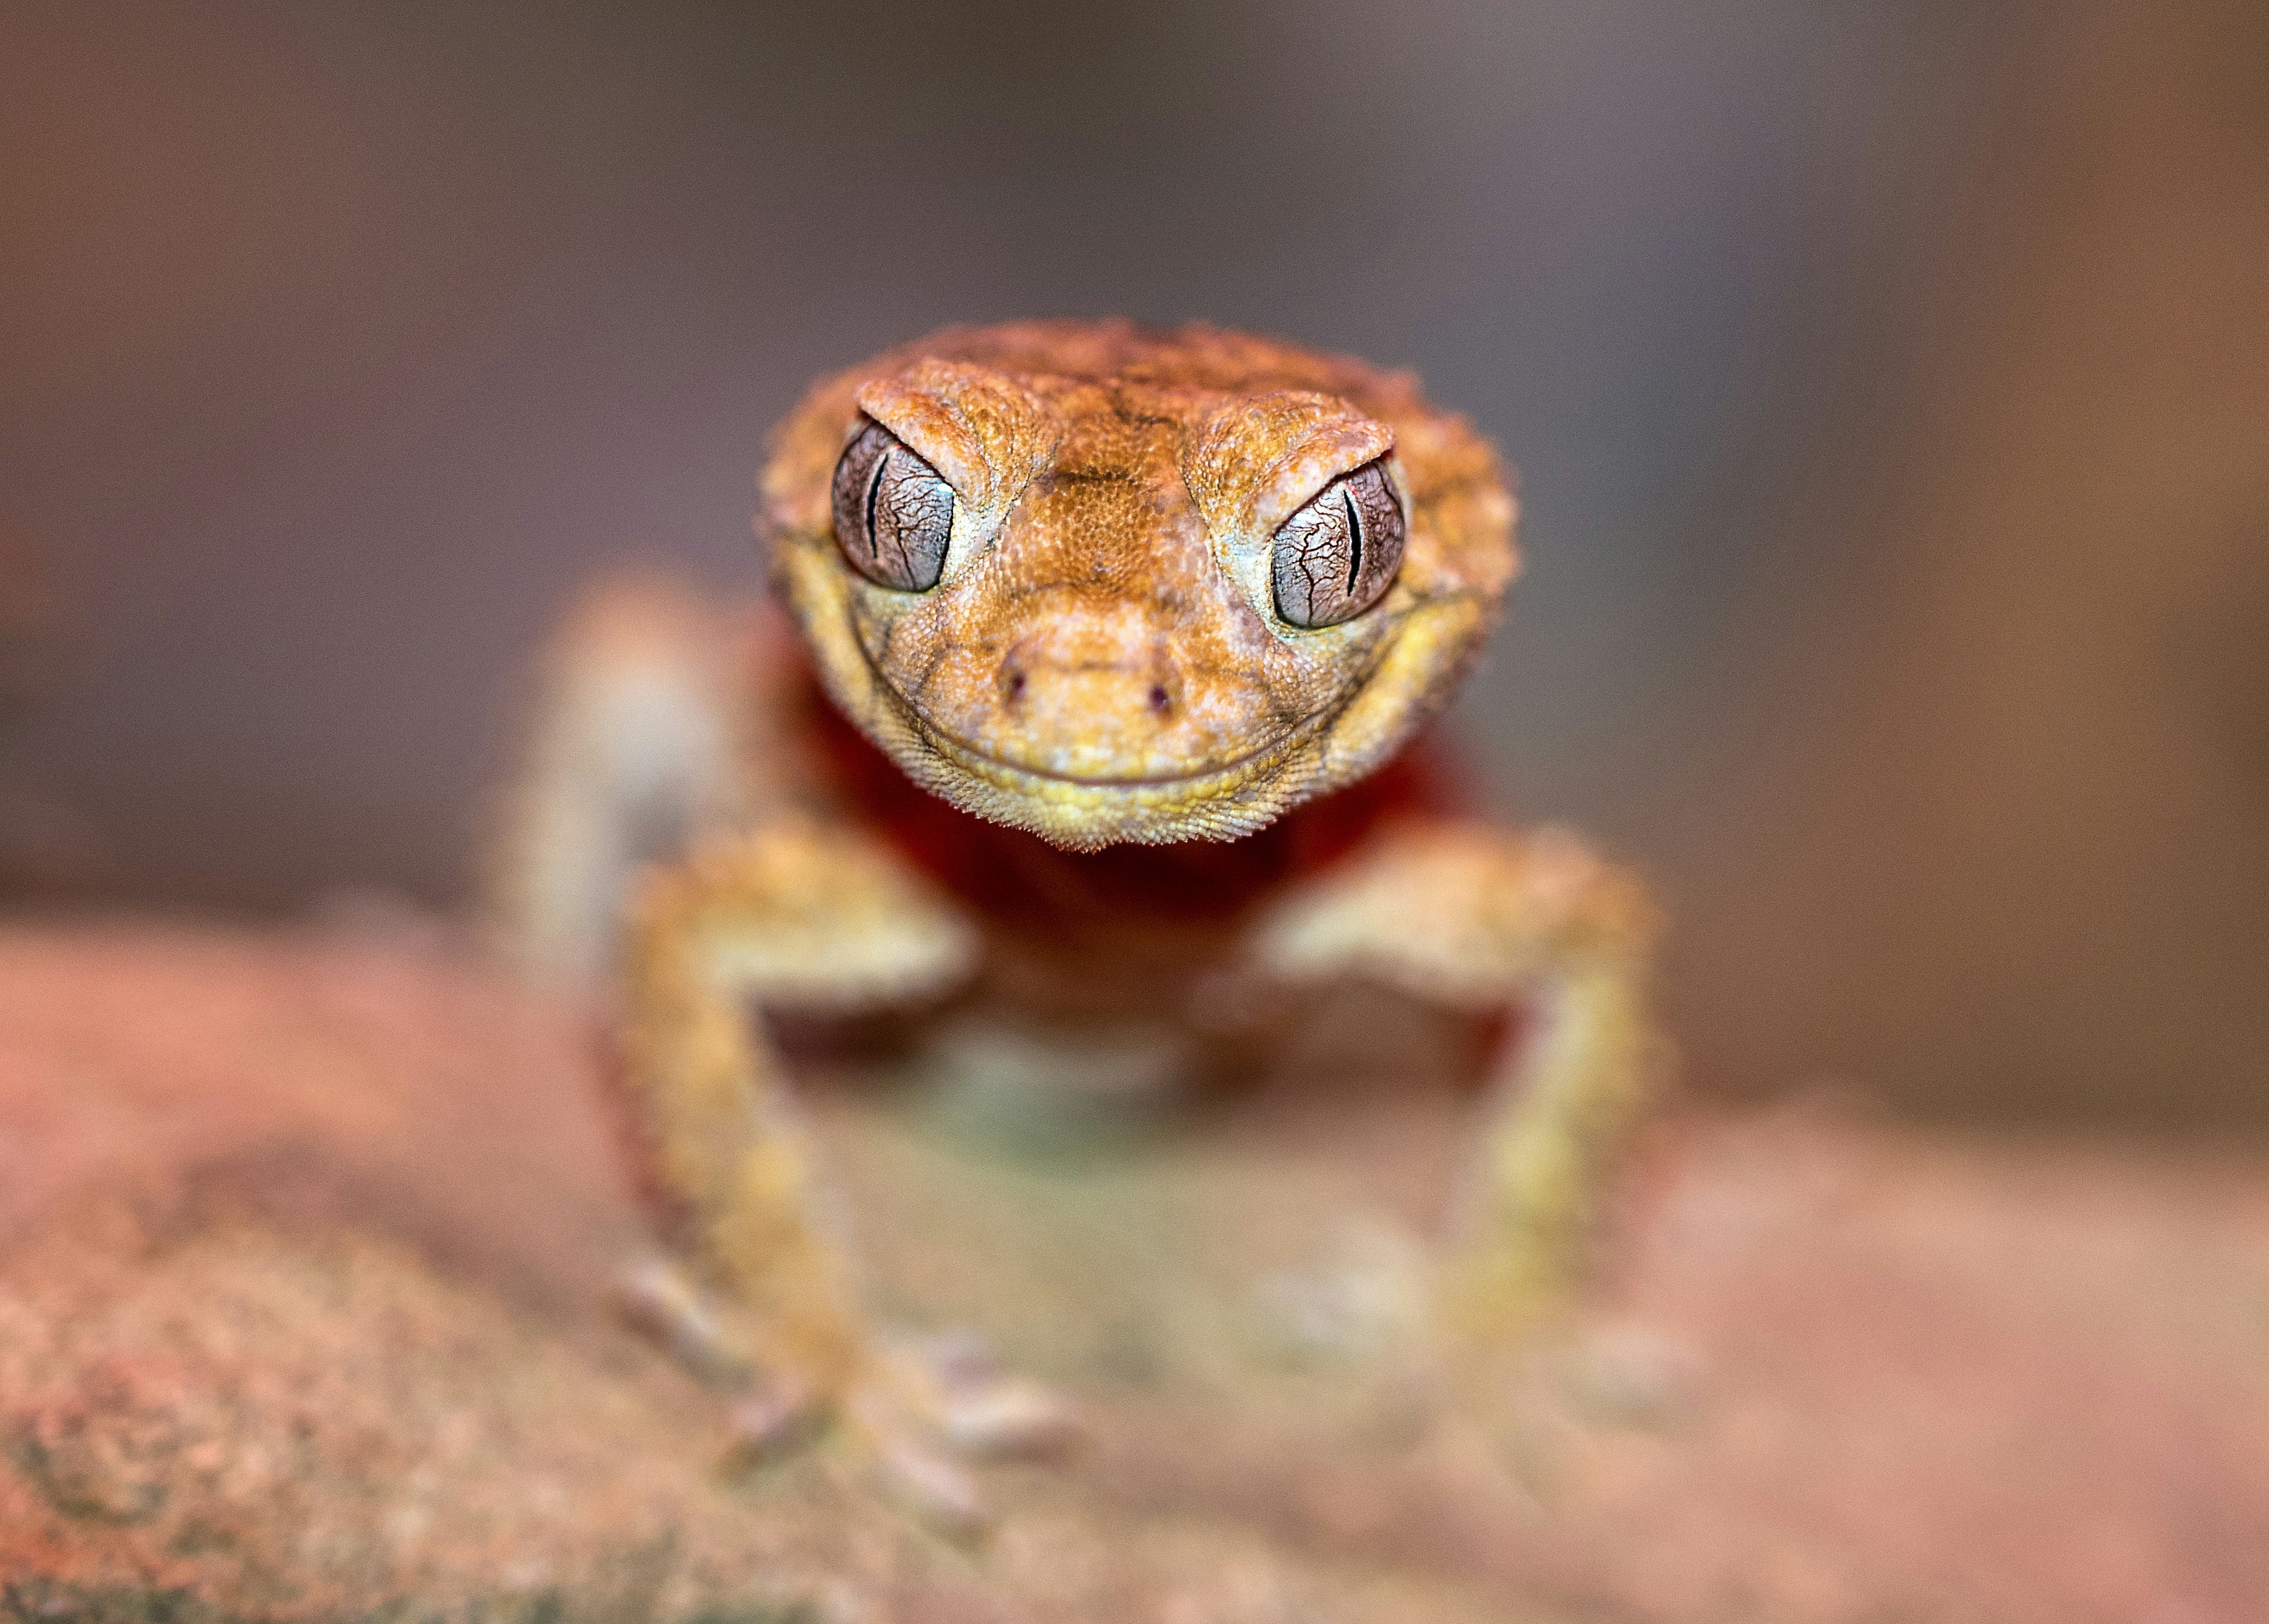 An inquisitive rough knob-tailed gecko checks me out. I have photographed this species before, but this time a little more light resulted in a completely different look and feel. I think this one makes a good screen saver/wall paper.